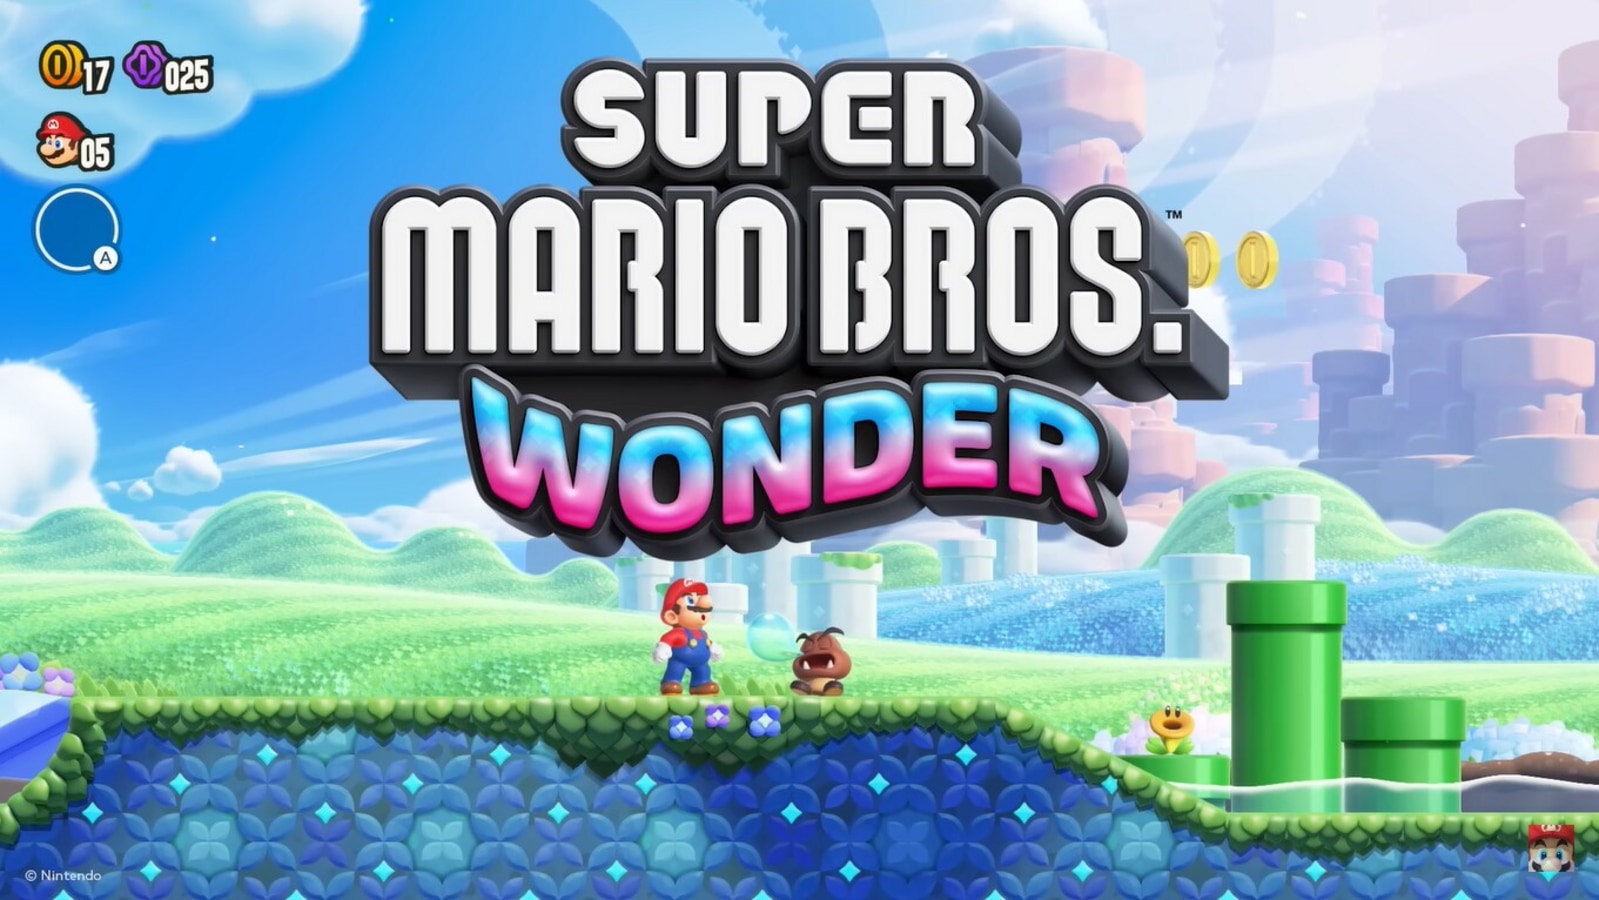 Super Mario All-Stars Game Download for PC  Super mario all stars, Classic  video games, Mario